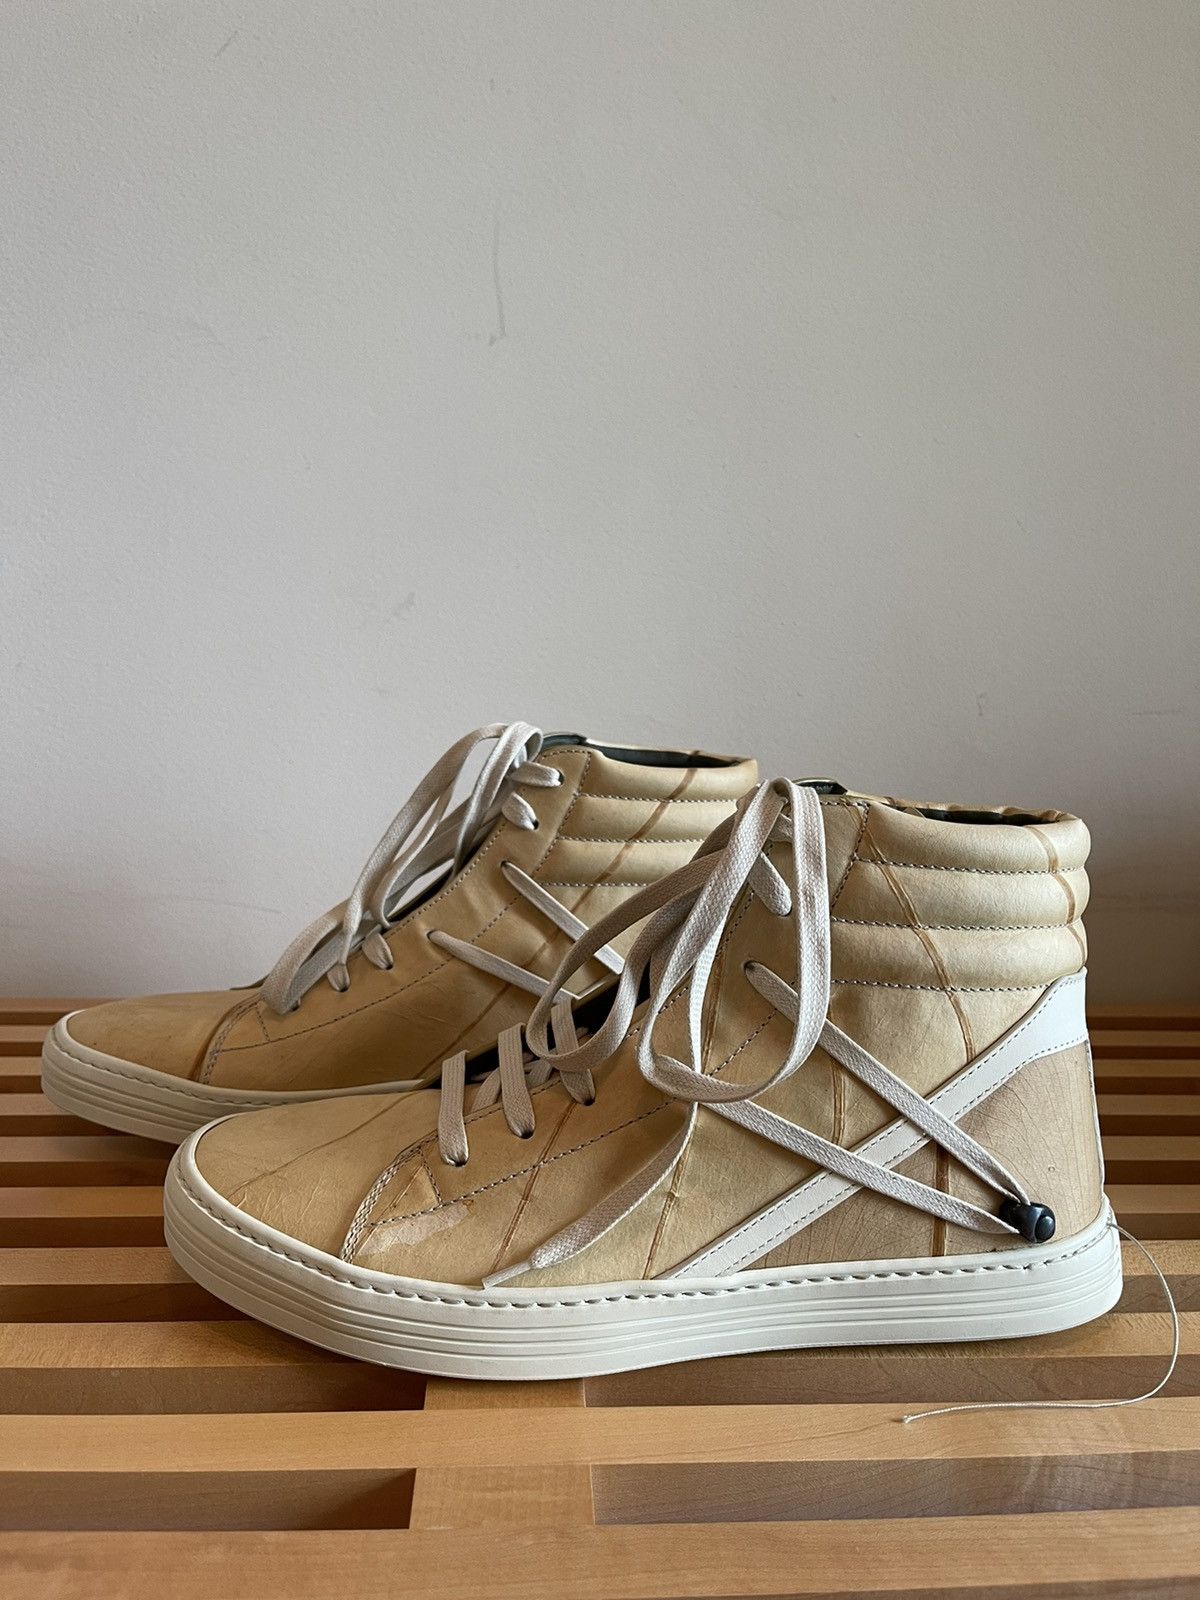 Rick Owens Rick Owens Geothrasher High in Natural Milk size 41 | Grailed